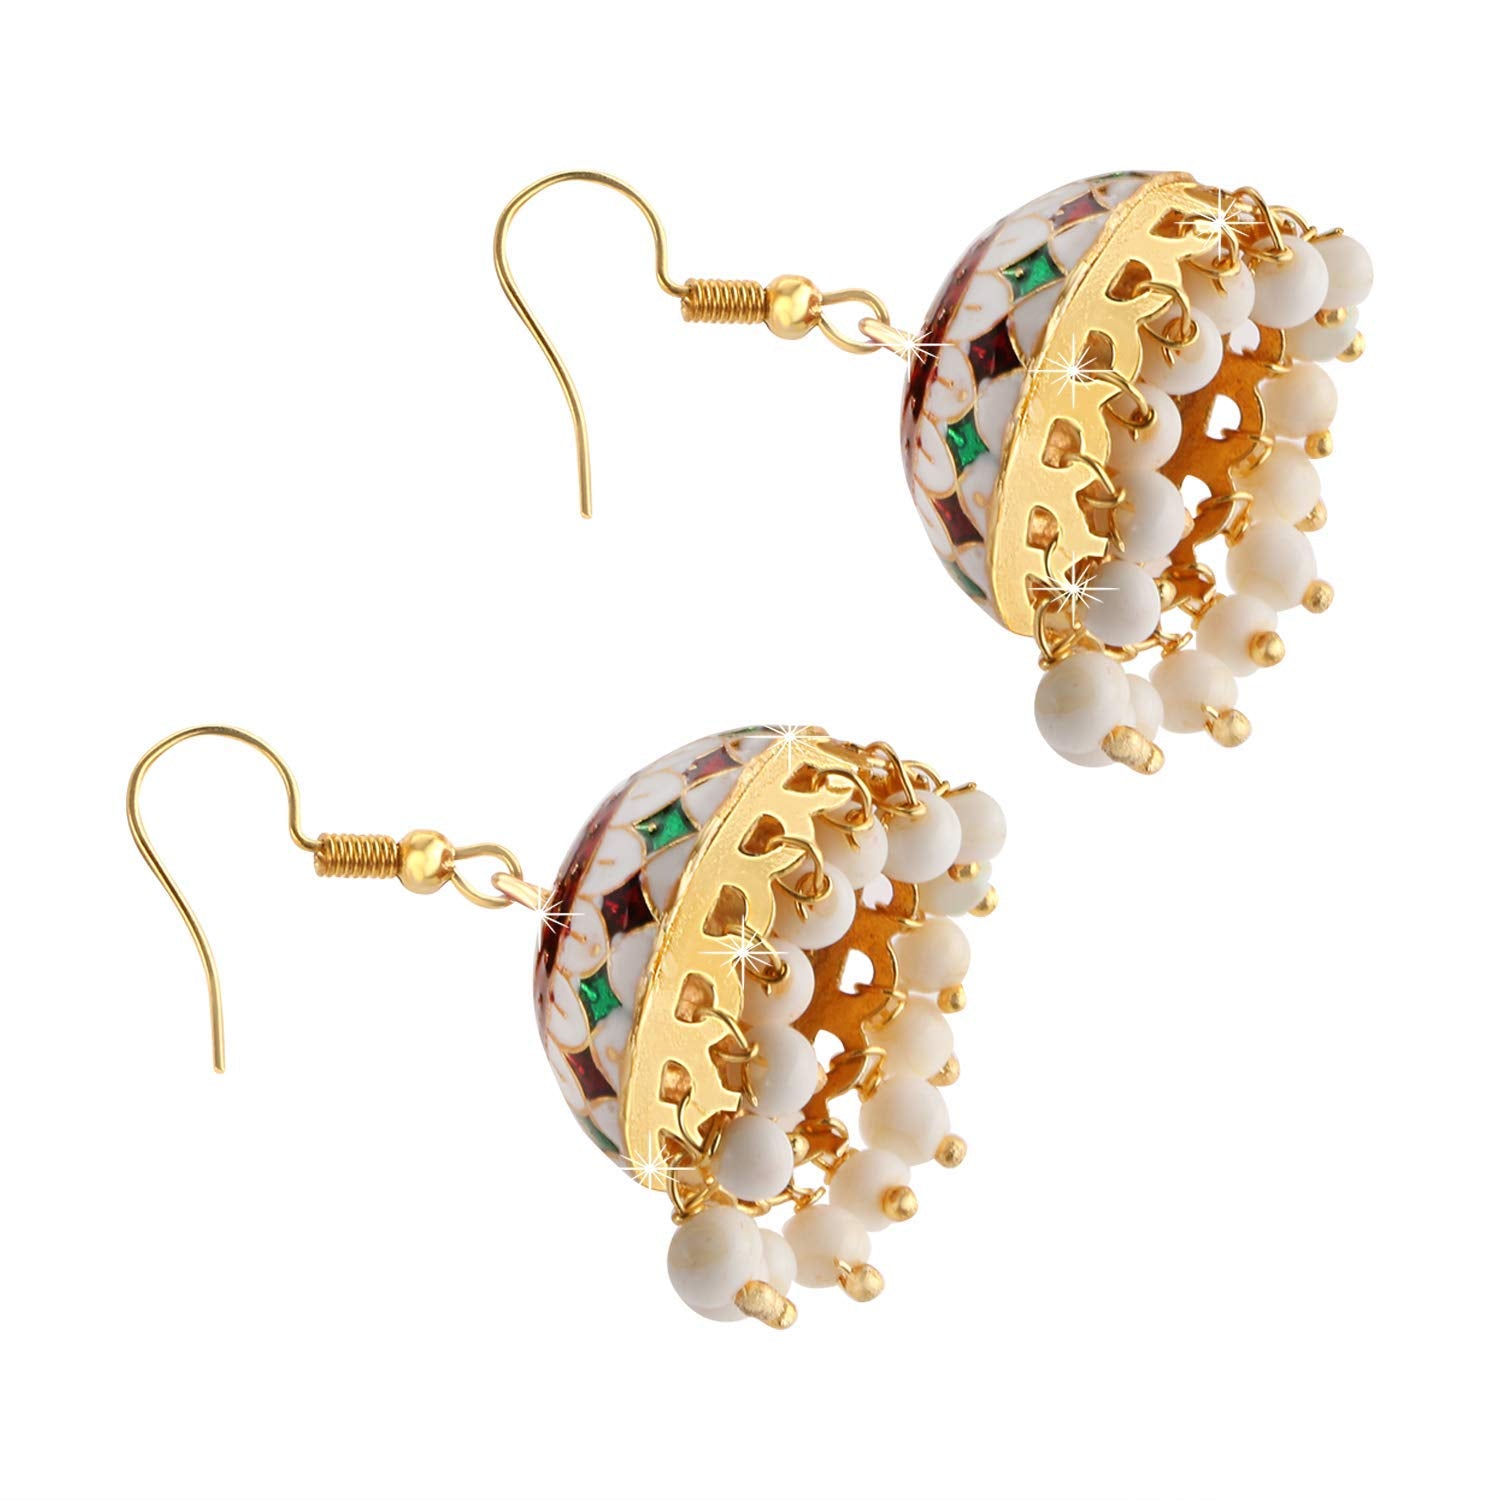 Yellow Chimes Craftsmanship Work Copper Gold Plated, Meenakari Handcrafted Floral Designer Traditional Gold Plated Jhumka/Jhumki Earrings for Women (Multicolour), Combo of 4 Pair